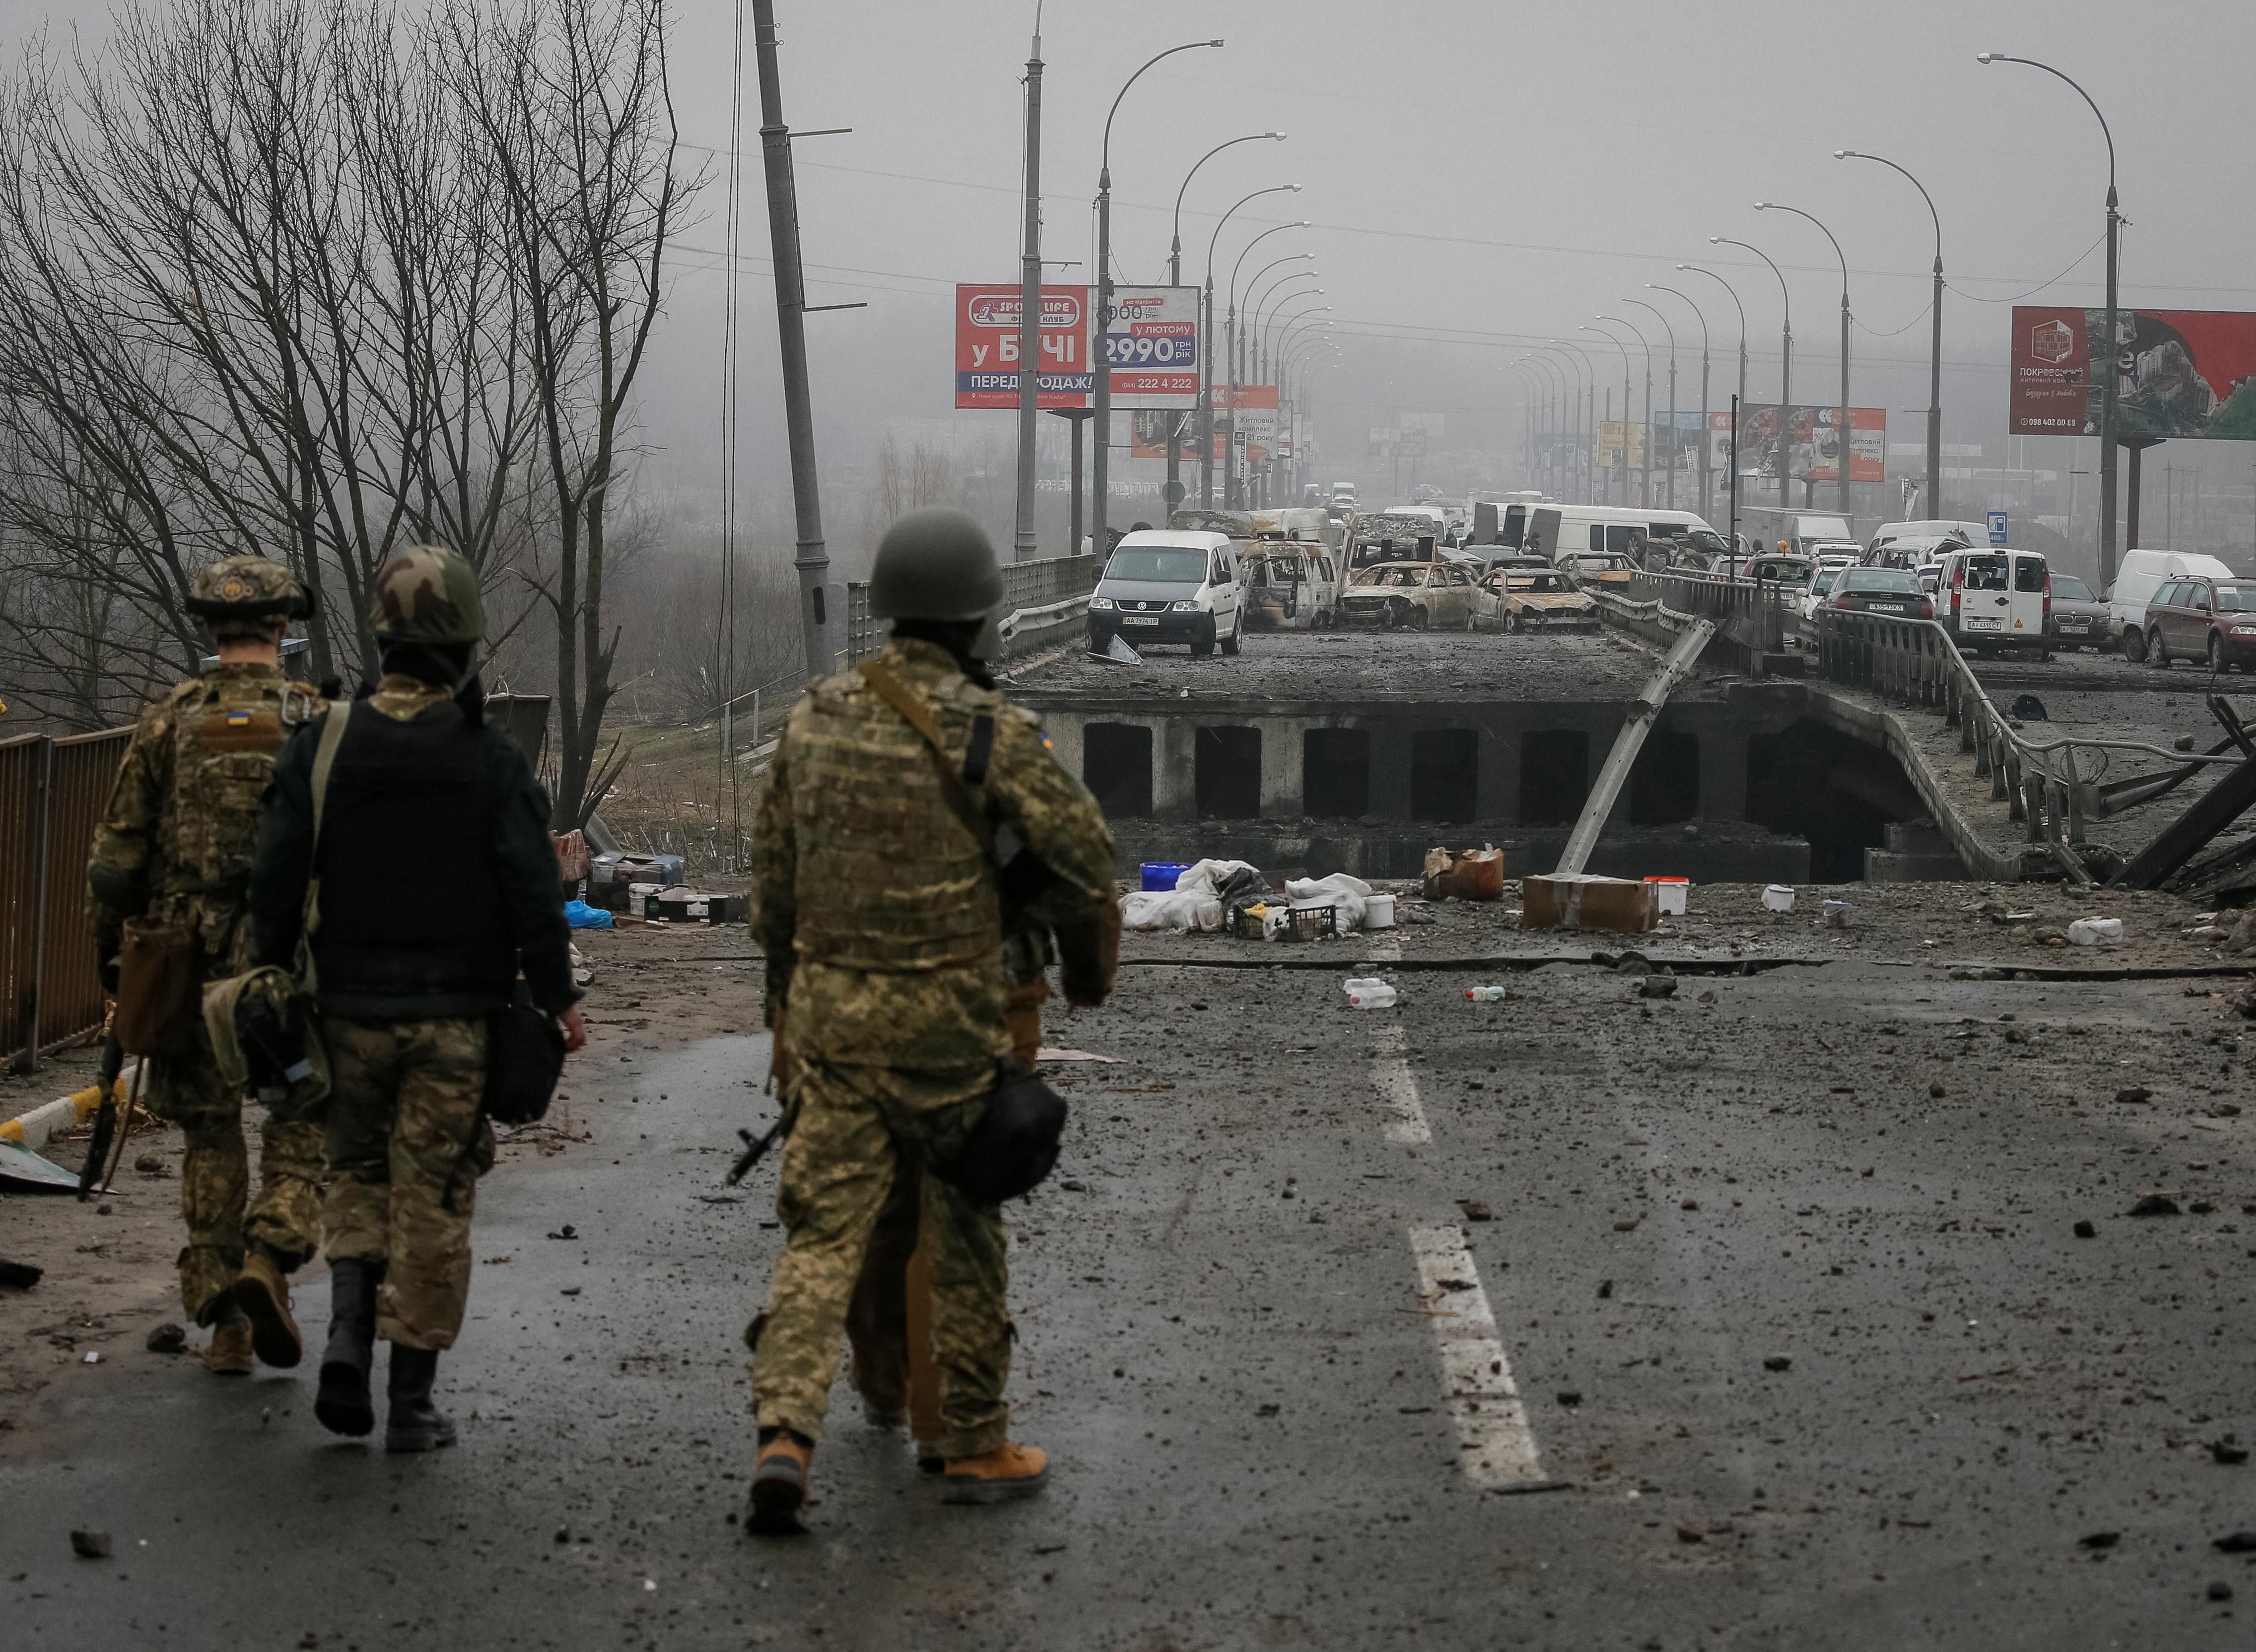 Ukrainian servicemen stand by a destroyed bridge as Russia's invasion of Ukraine continues, in the town of Irpin outside Kyiv